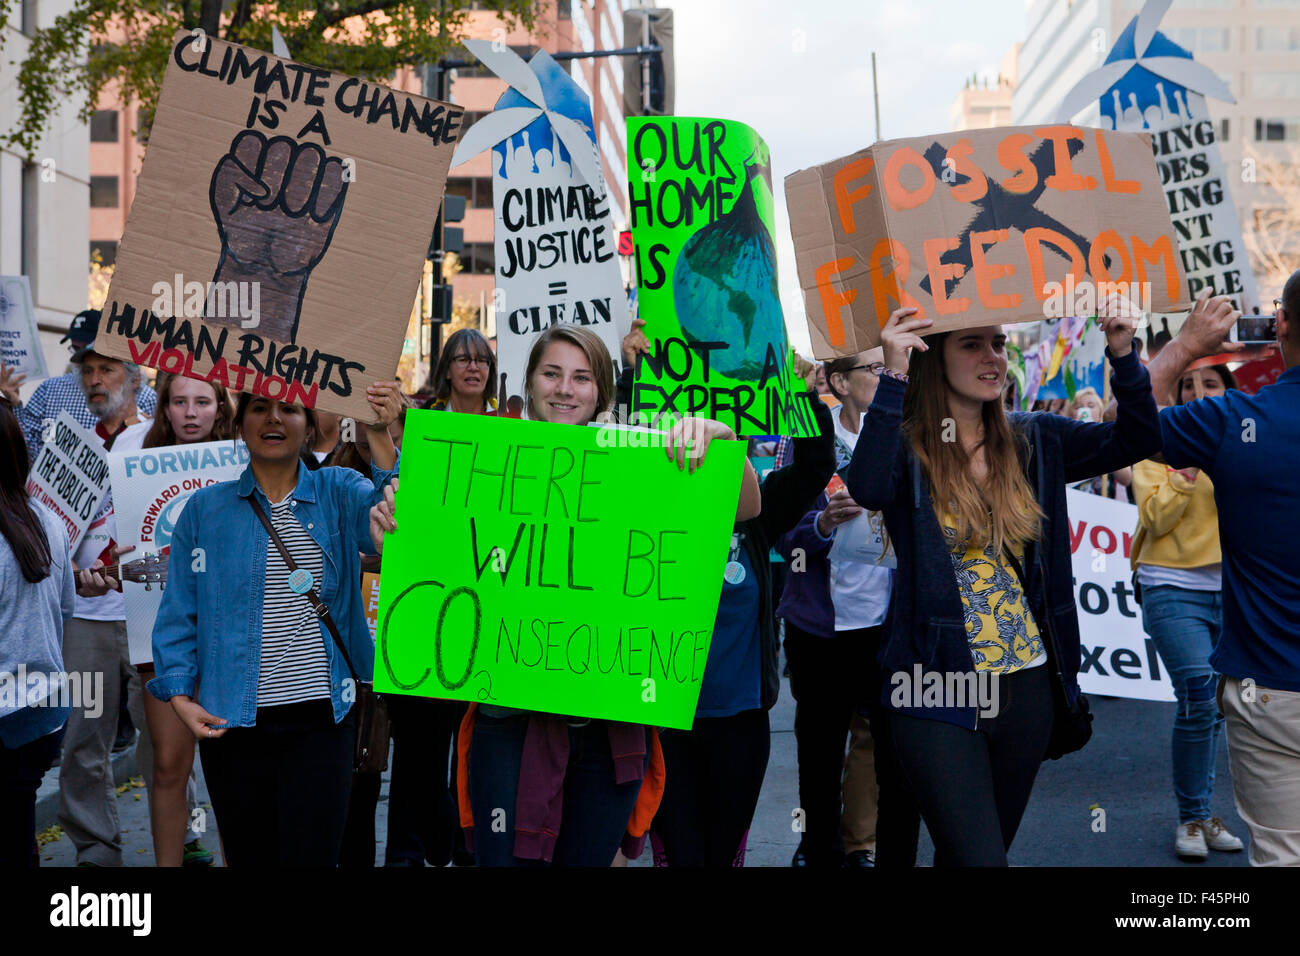 Washington, DC USA. 14th October, 2015:  Hundreds of climate activists gathered in Washington, DC to take part in the National day of action on climate, called the People's Climate March.  Activists gathered in Franklin Square and marched to the American Petroleum Institute on K St., where activists staged street theater and chanted climate and democracy slogans. Credit:  B Christopher/Alamy Live News Stock Photo